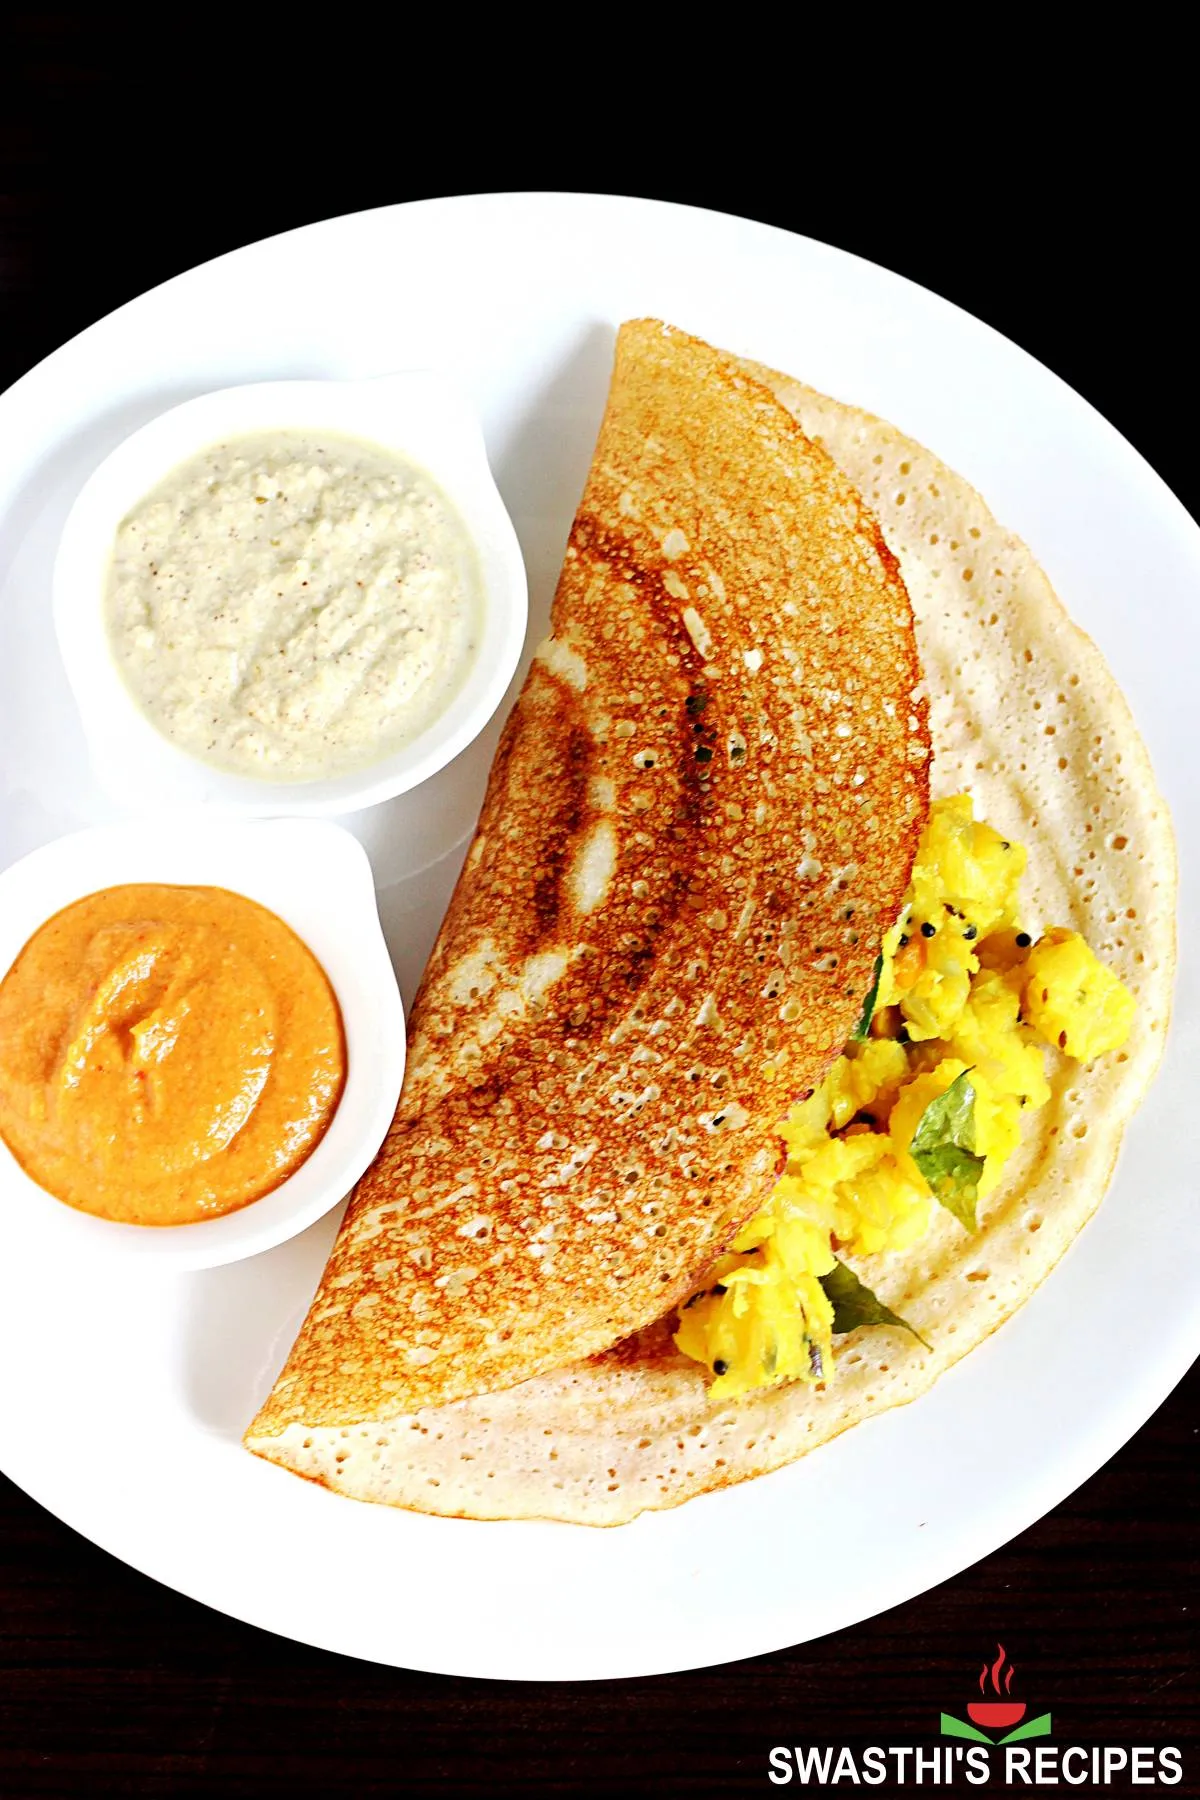 Dosa recipe with homemade batter served with chutney